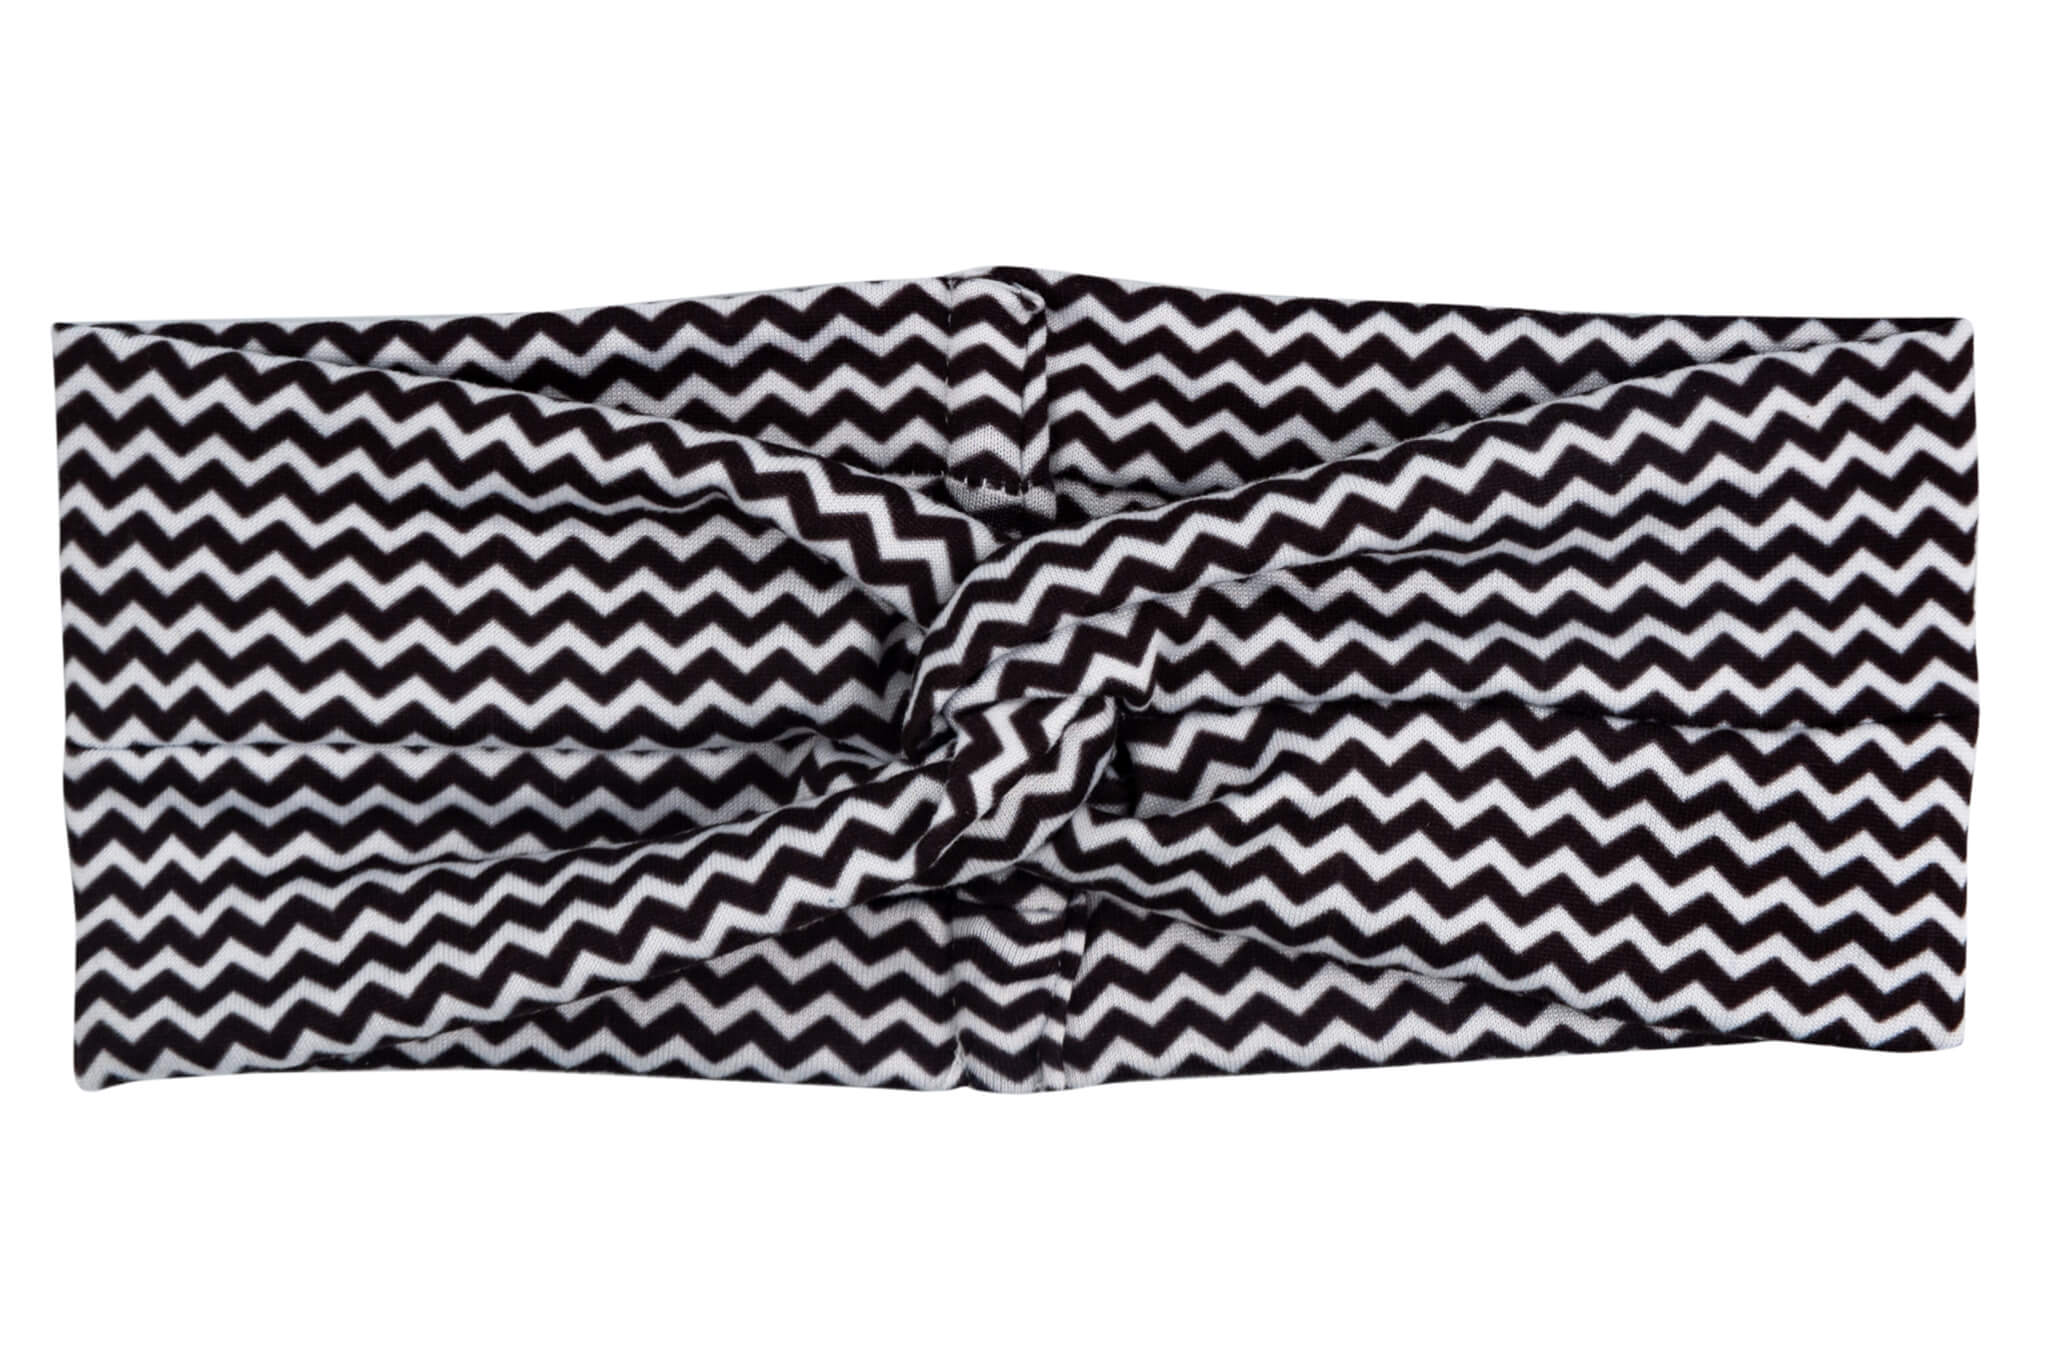 A black and white turban headband for women from By Bella Boutique.